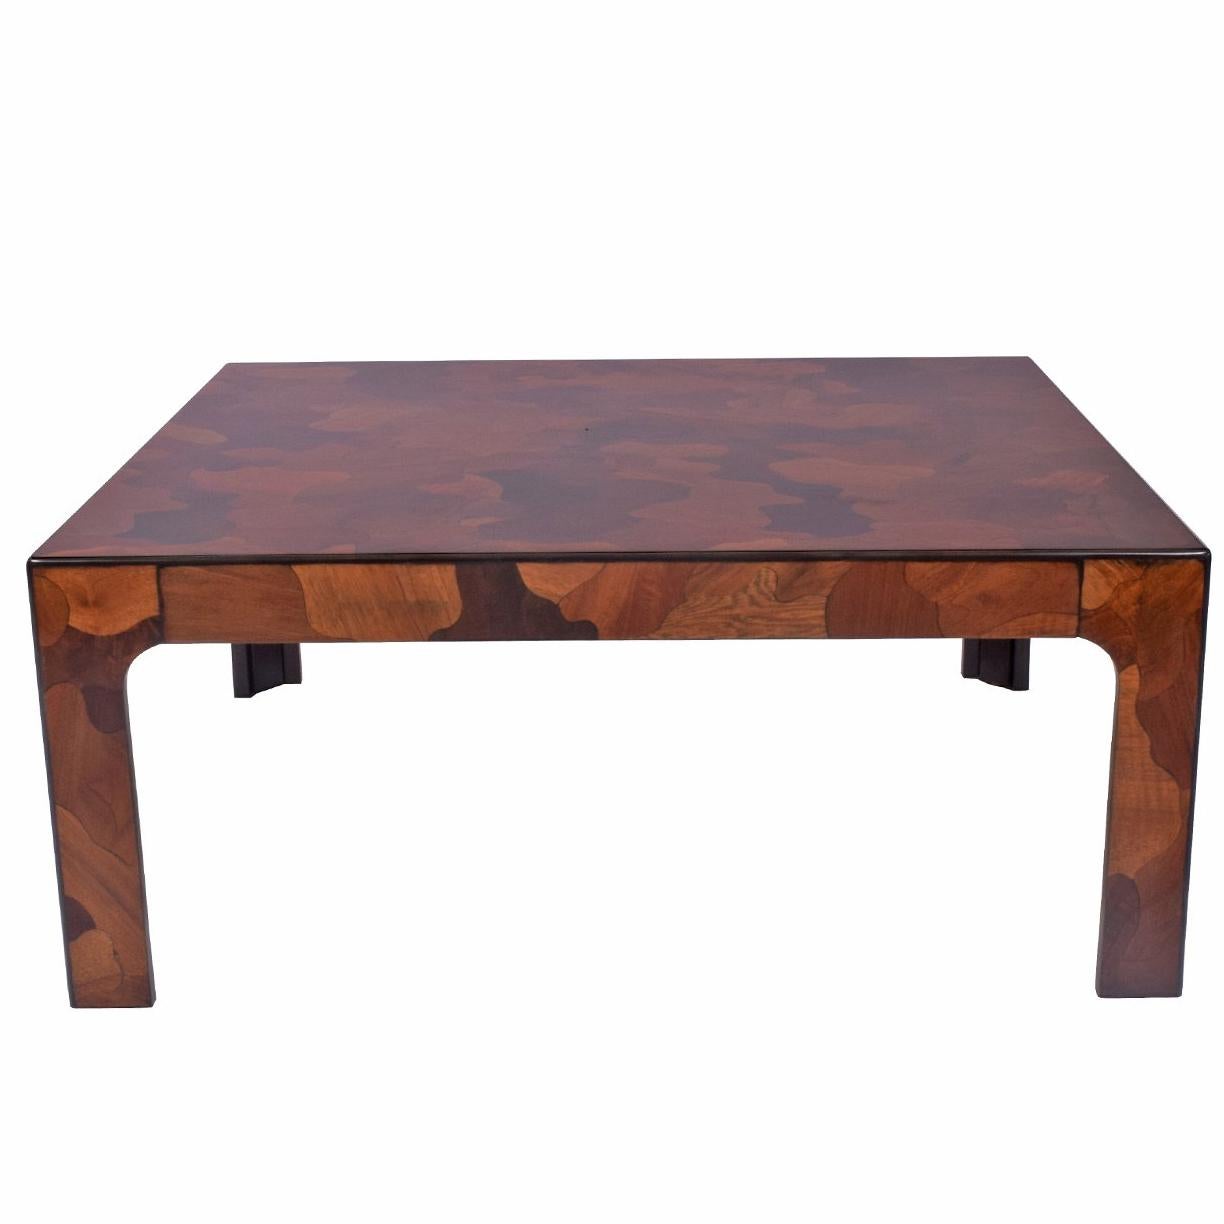 1970s American Burl Patchwork Coffee Table